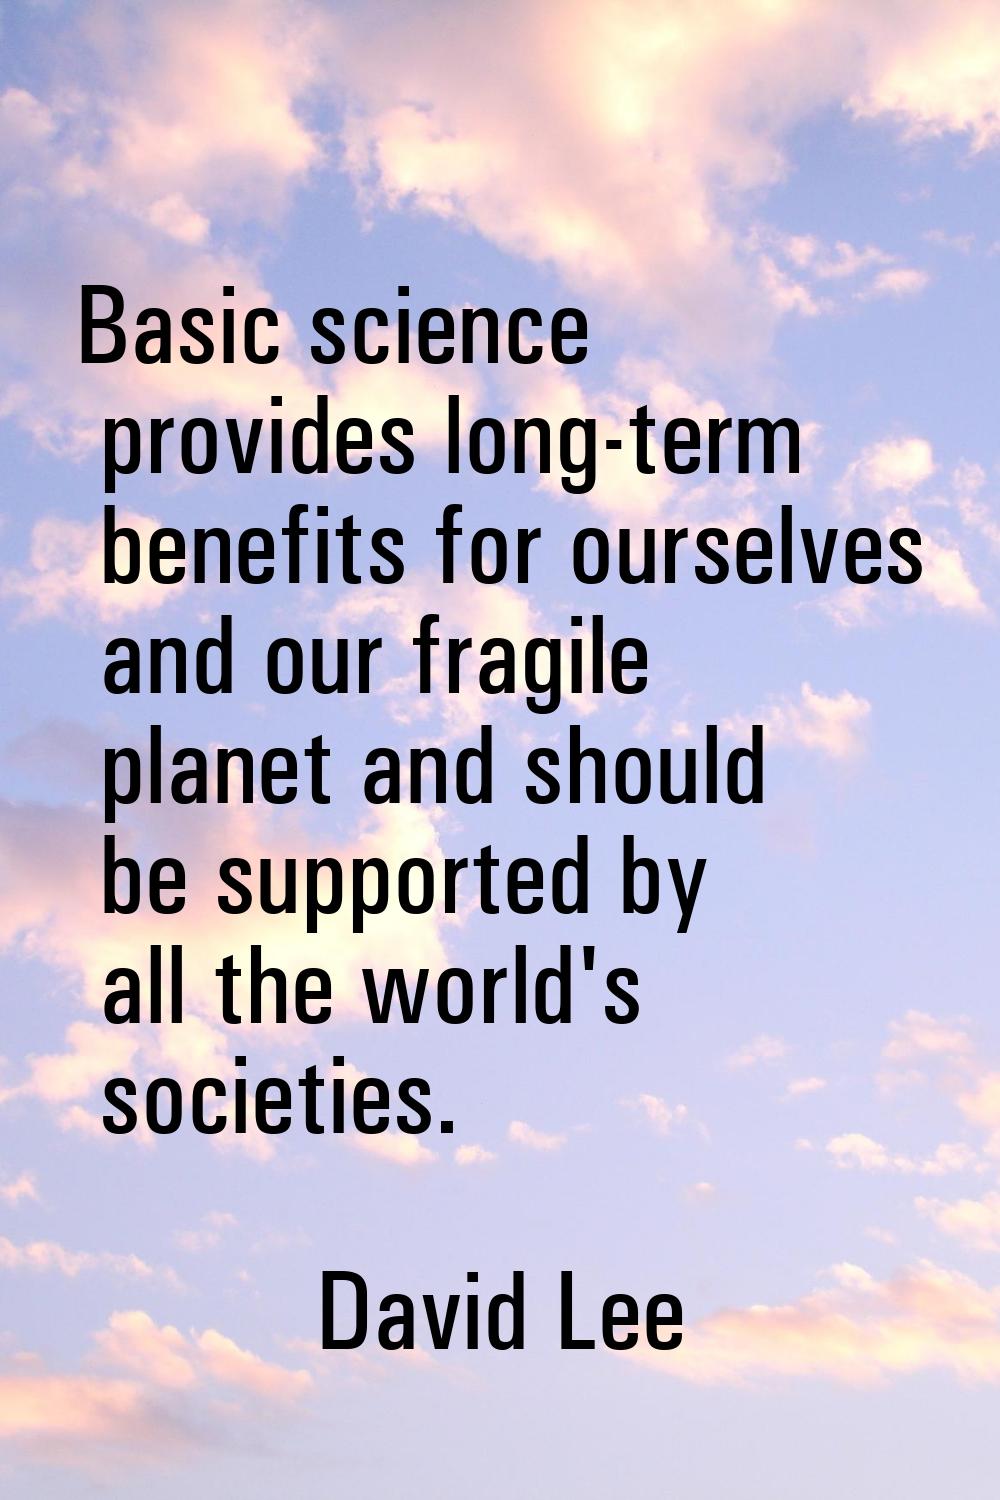 Basic science provides long-term benefits for ourselves and our fragile planet and should be suppor